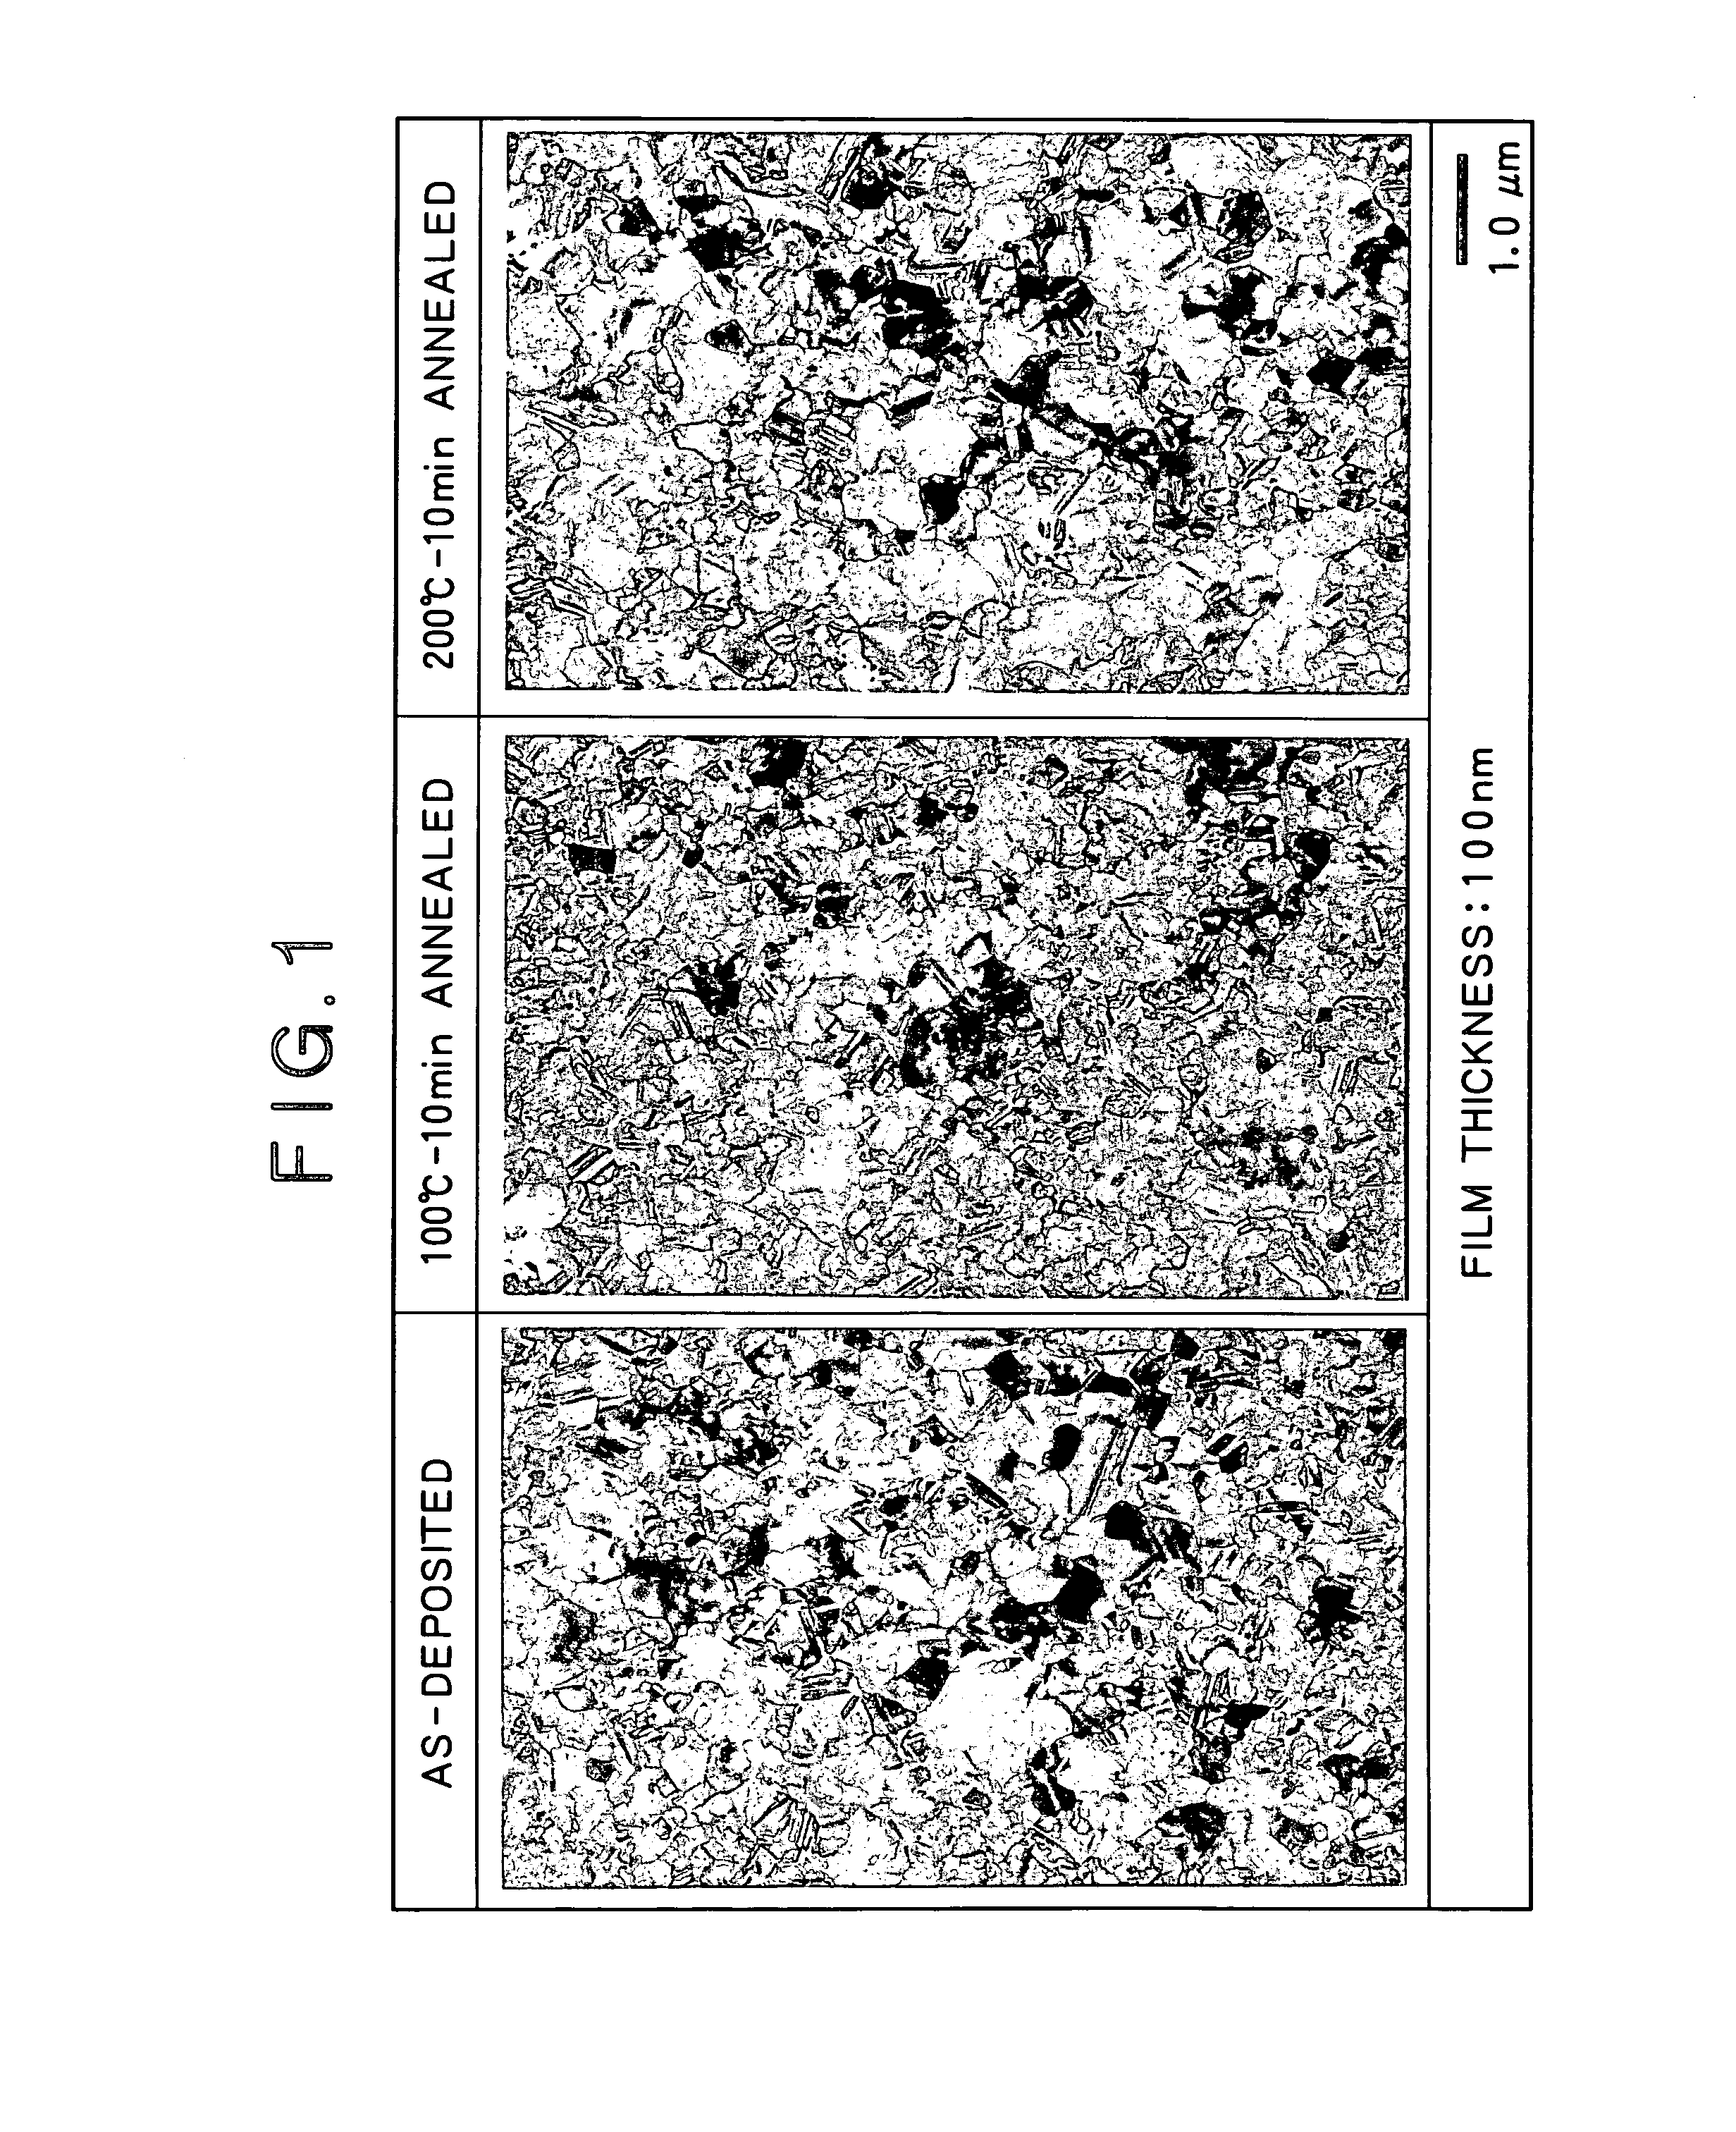 Reflective film, reflection type liquid crystal display, and sputtering target for forming the reflective film